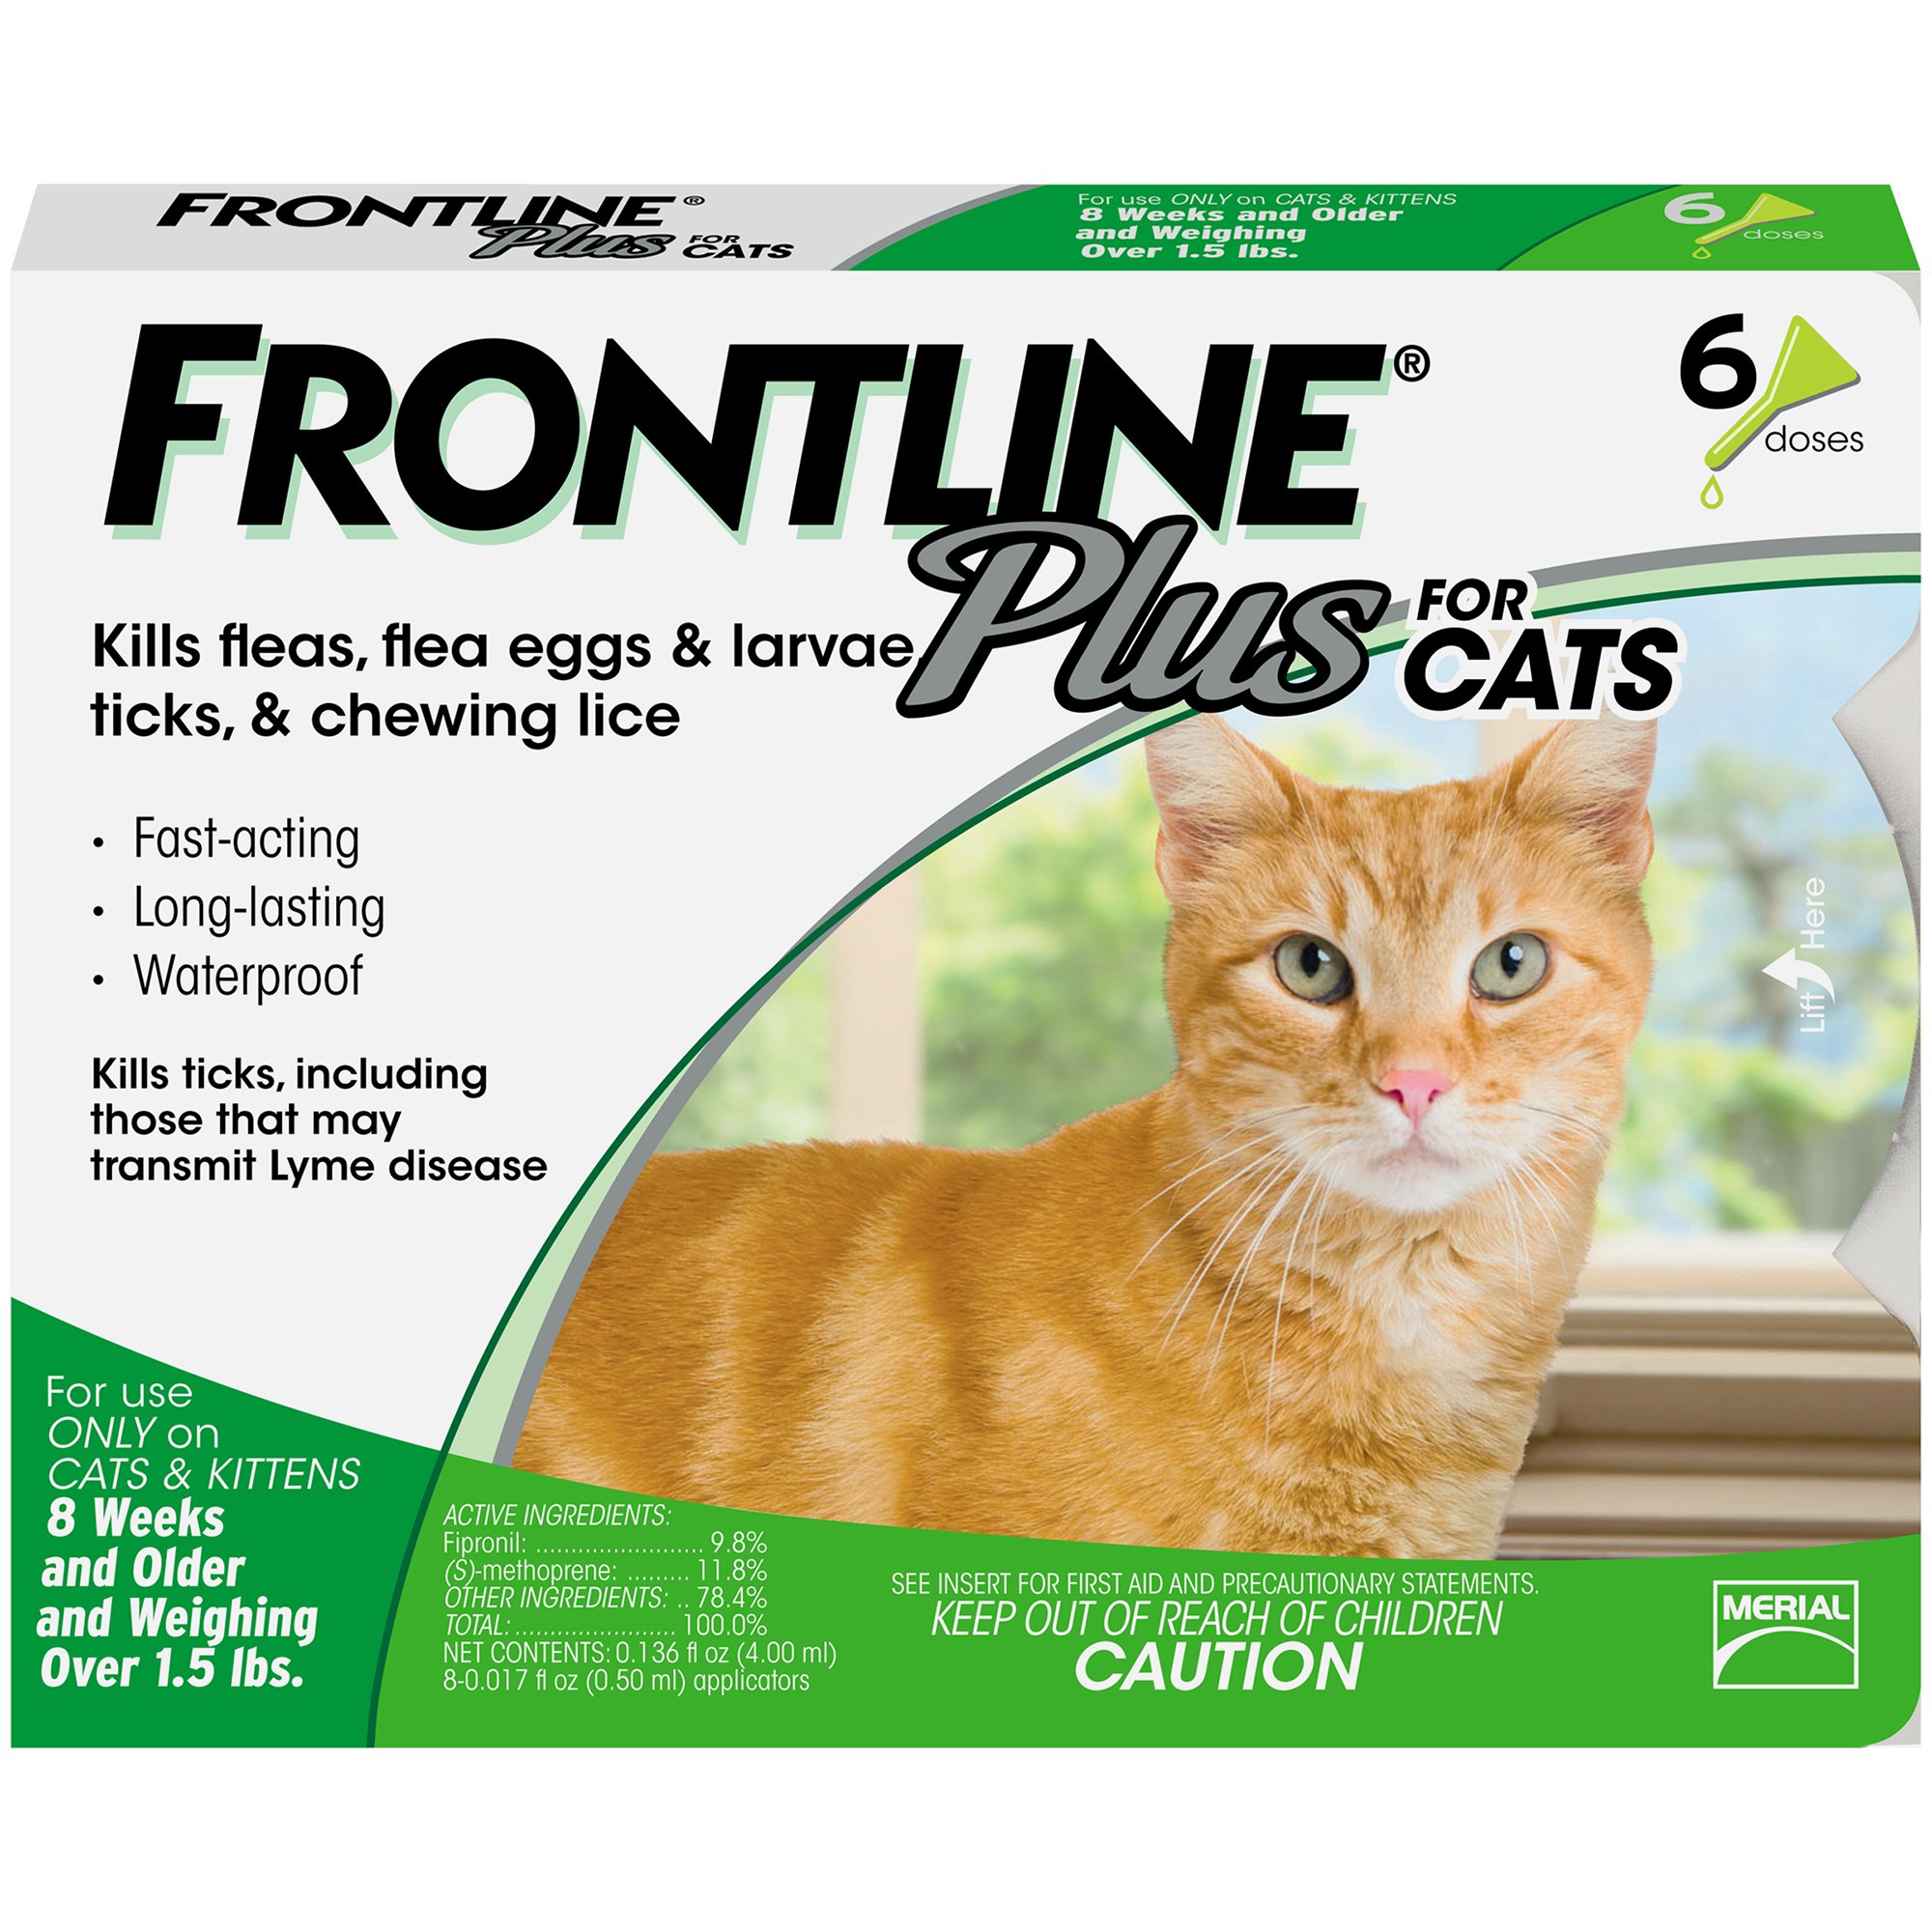 FRONTLINE Plus for Cats, 6 Month | Petco